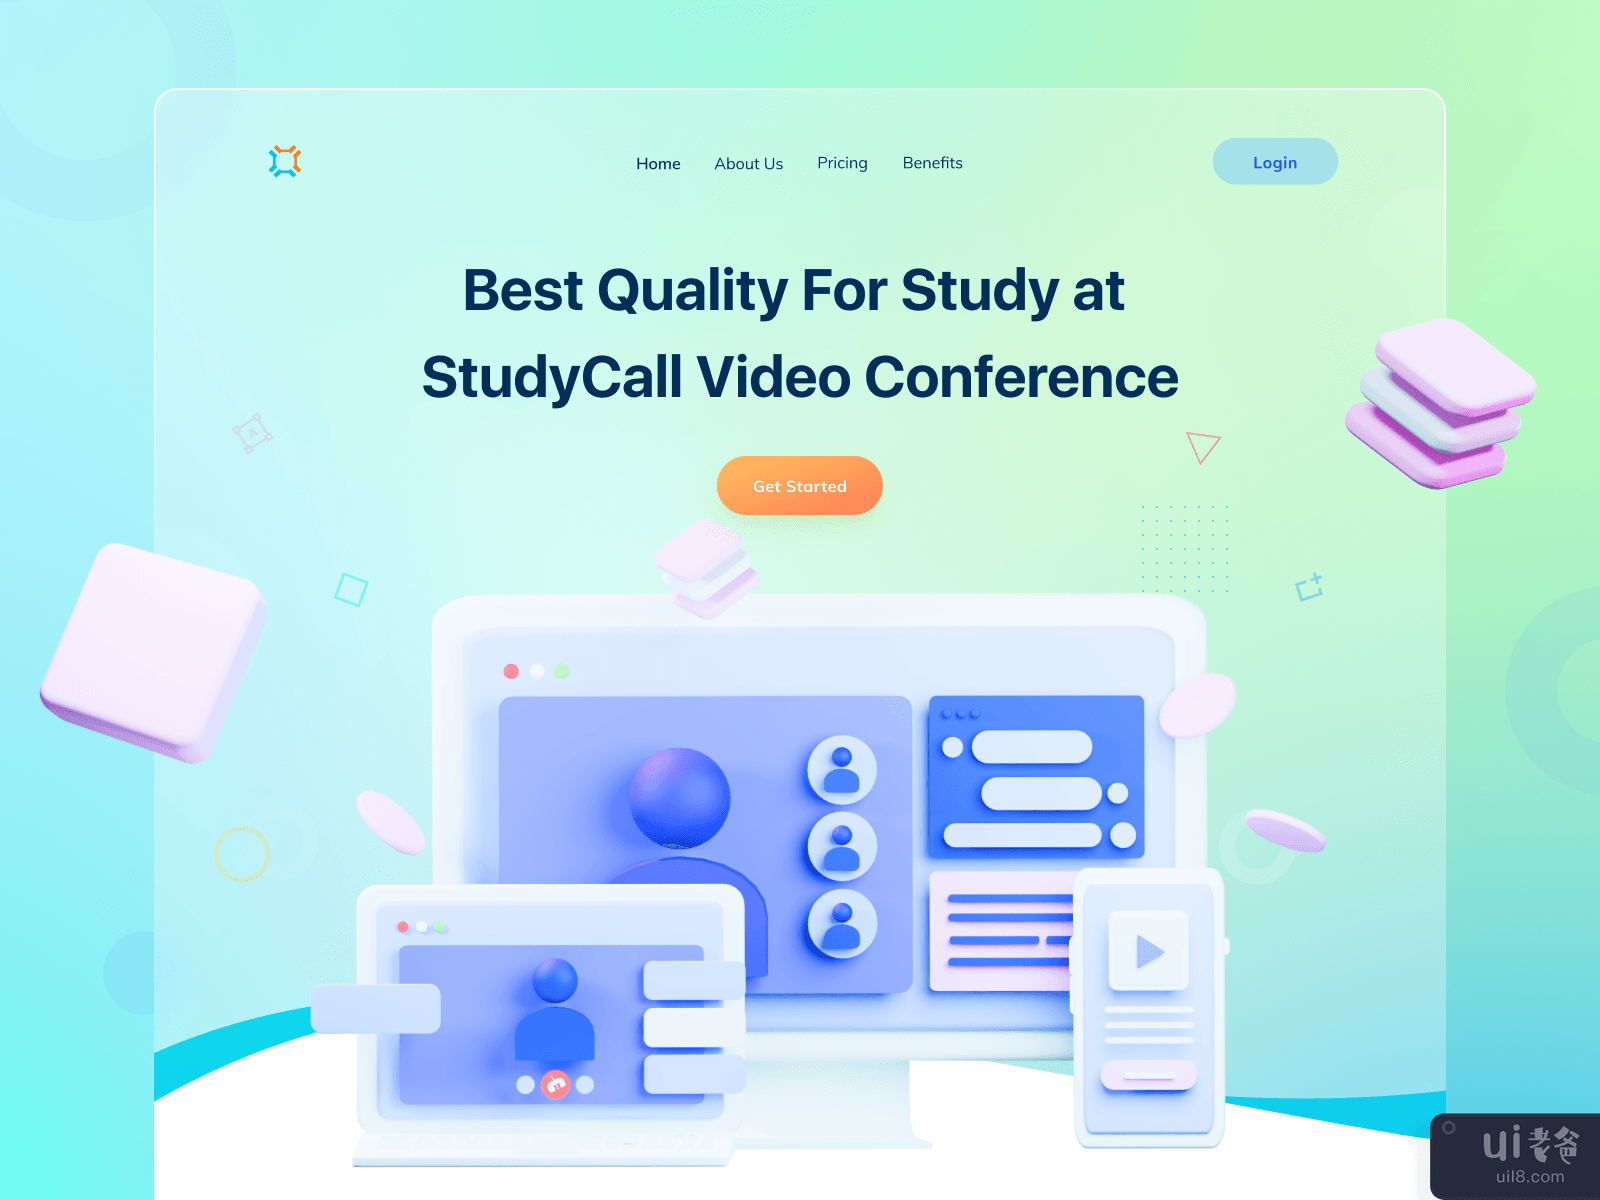 Study Call - 3D Landing Page